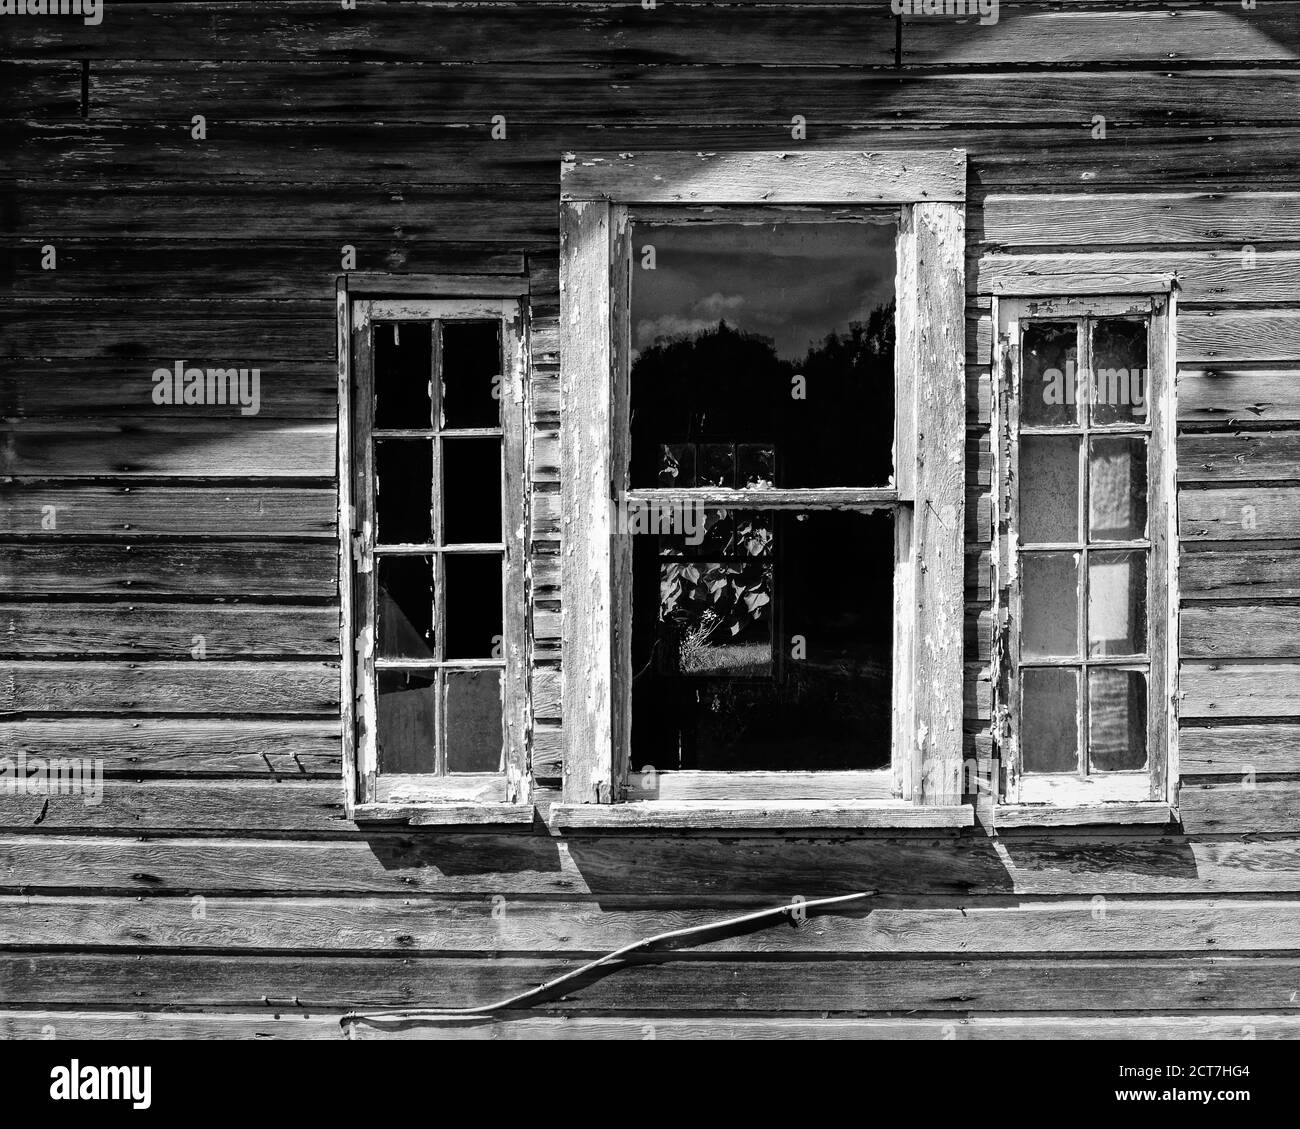 Three windows on the side of an abandoned shack so weathered all of the external paint has faded away. Stock Photo